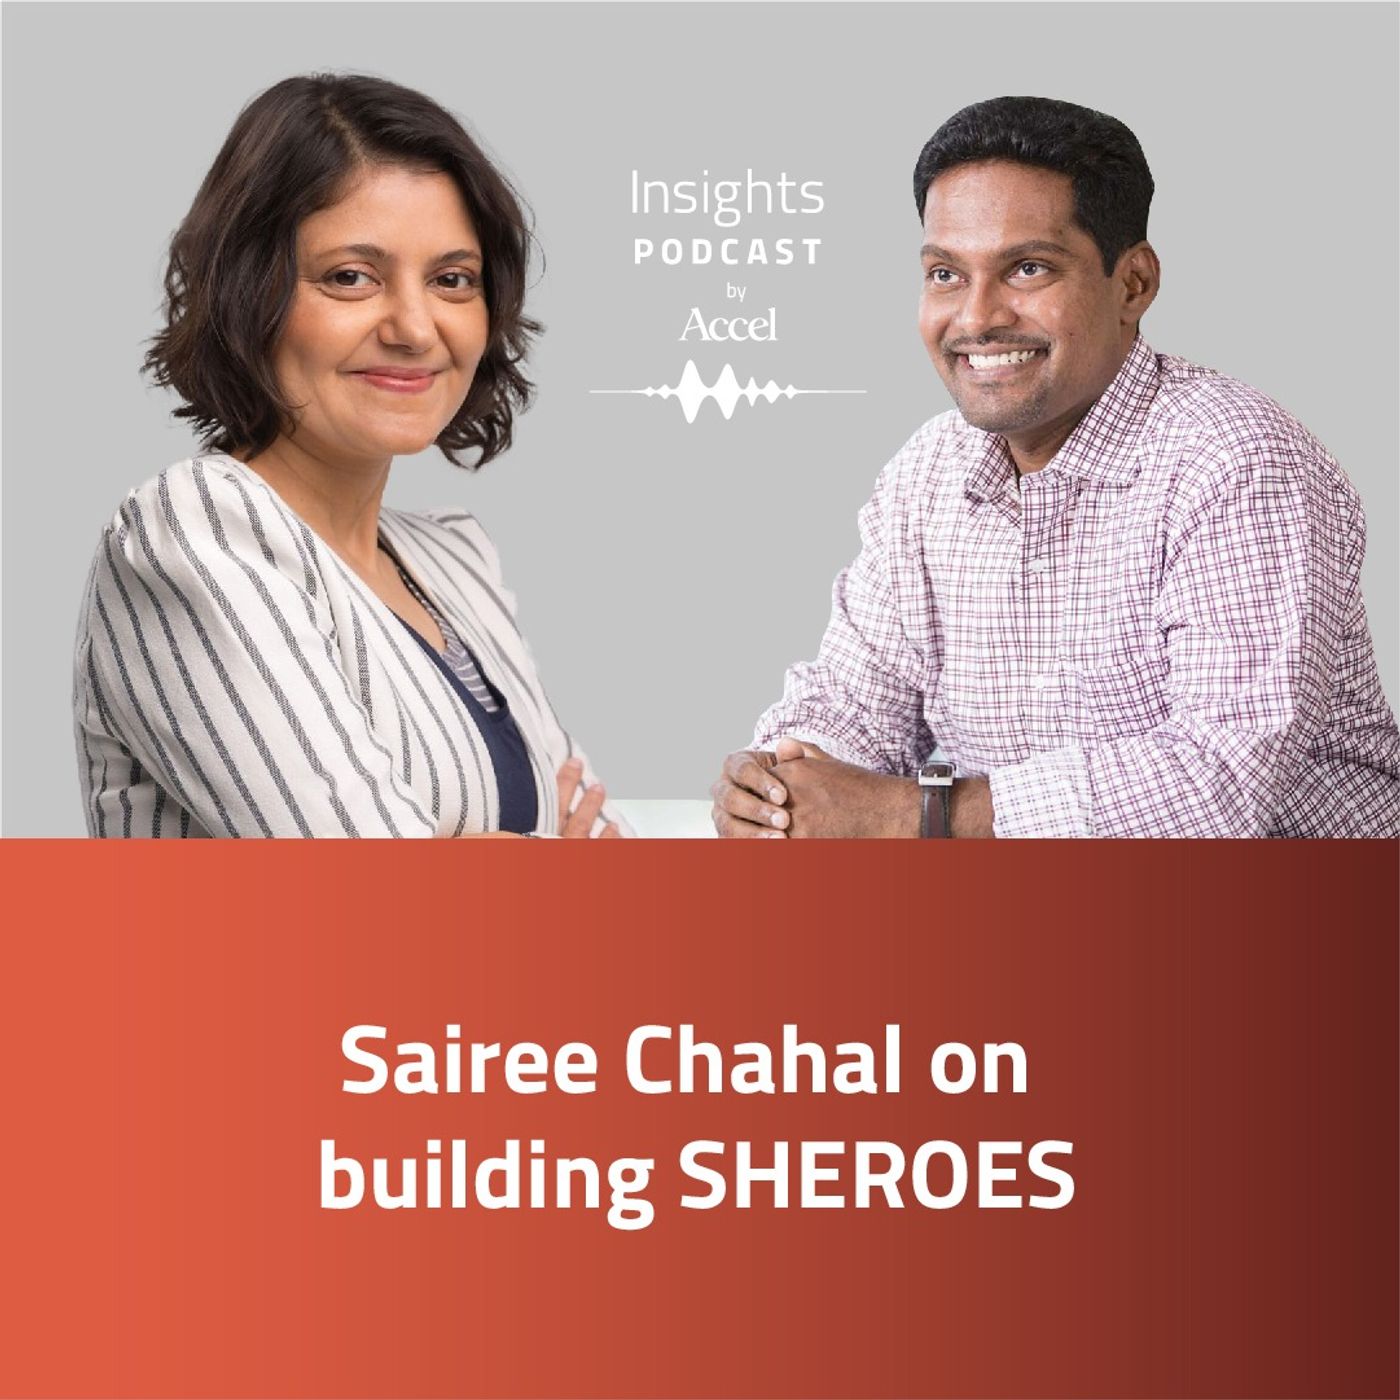 INSIGHTS #56 – Sairee Chahal on building SHEROES